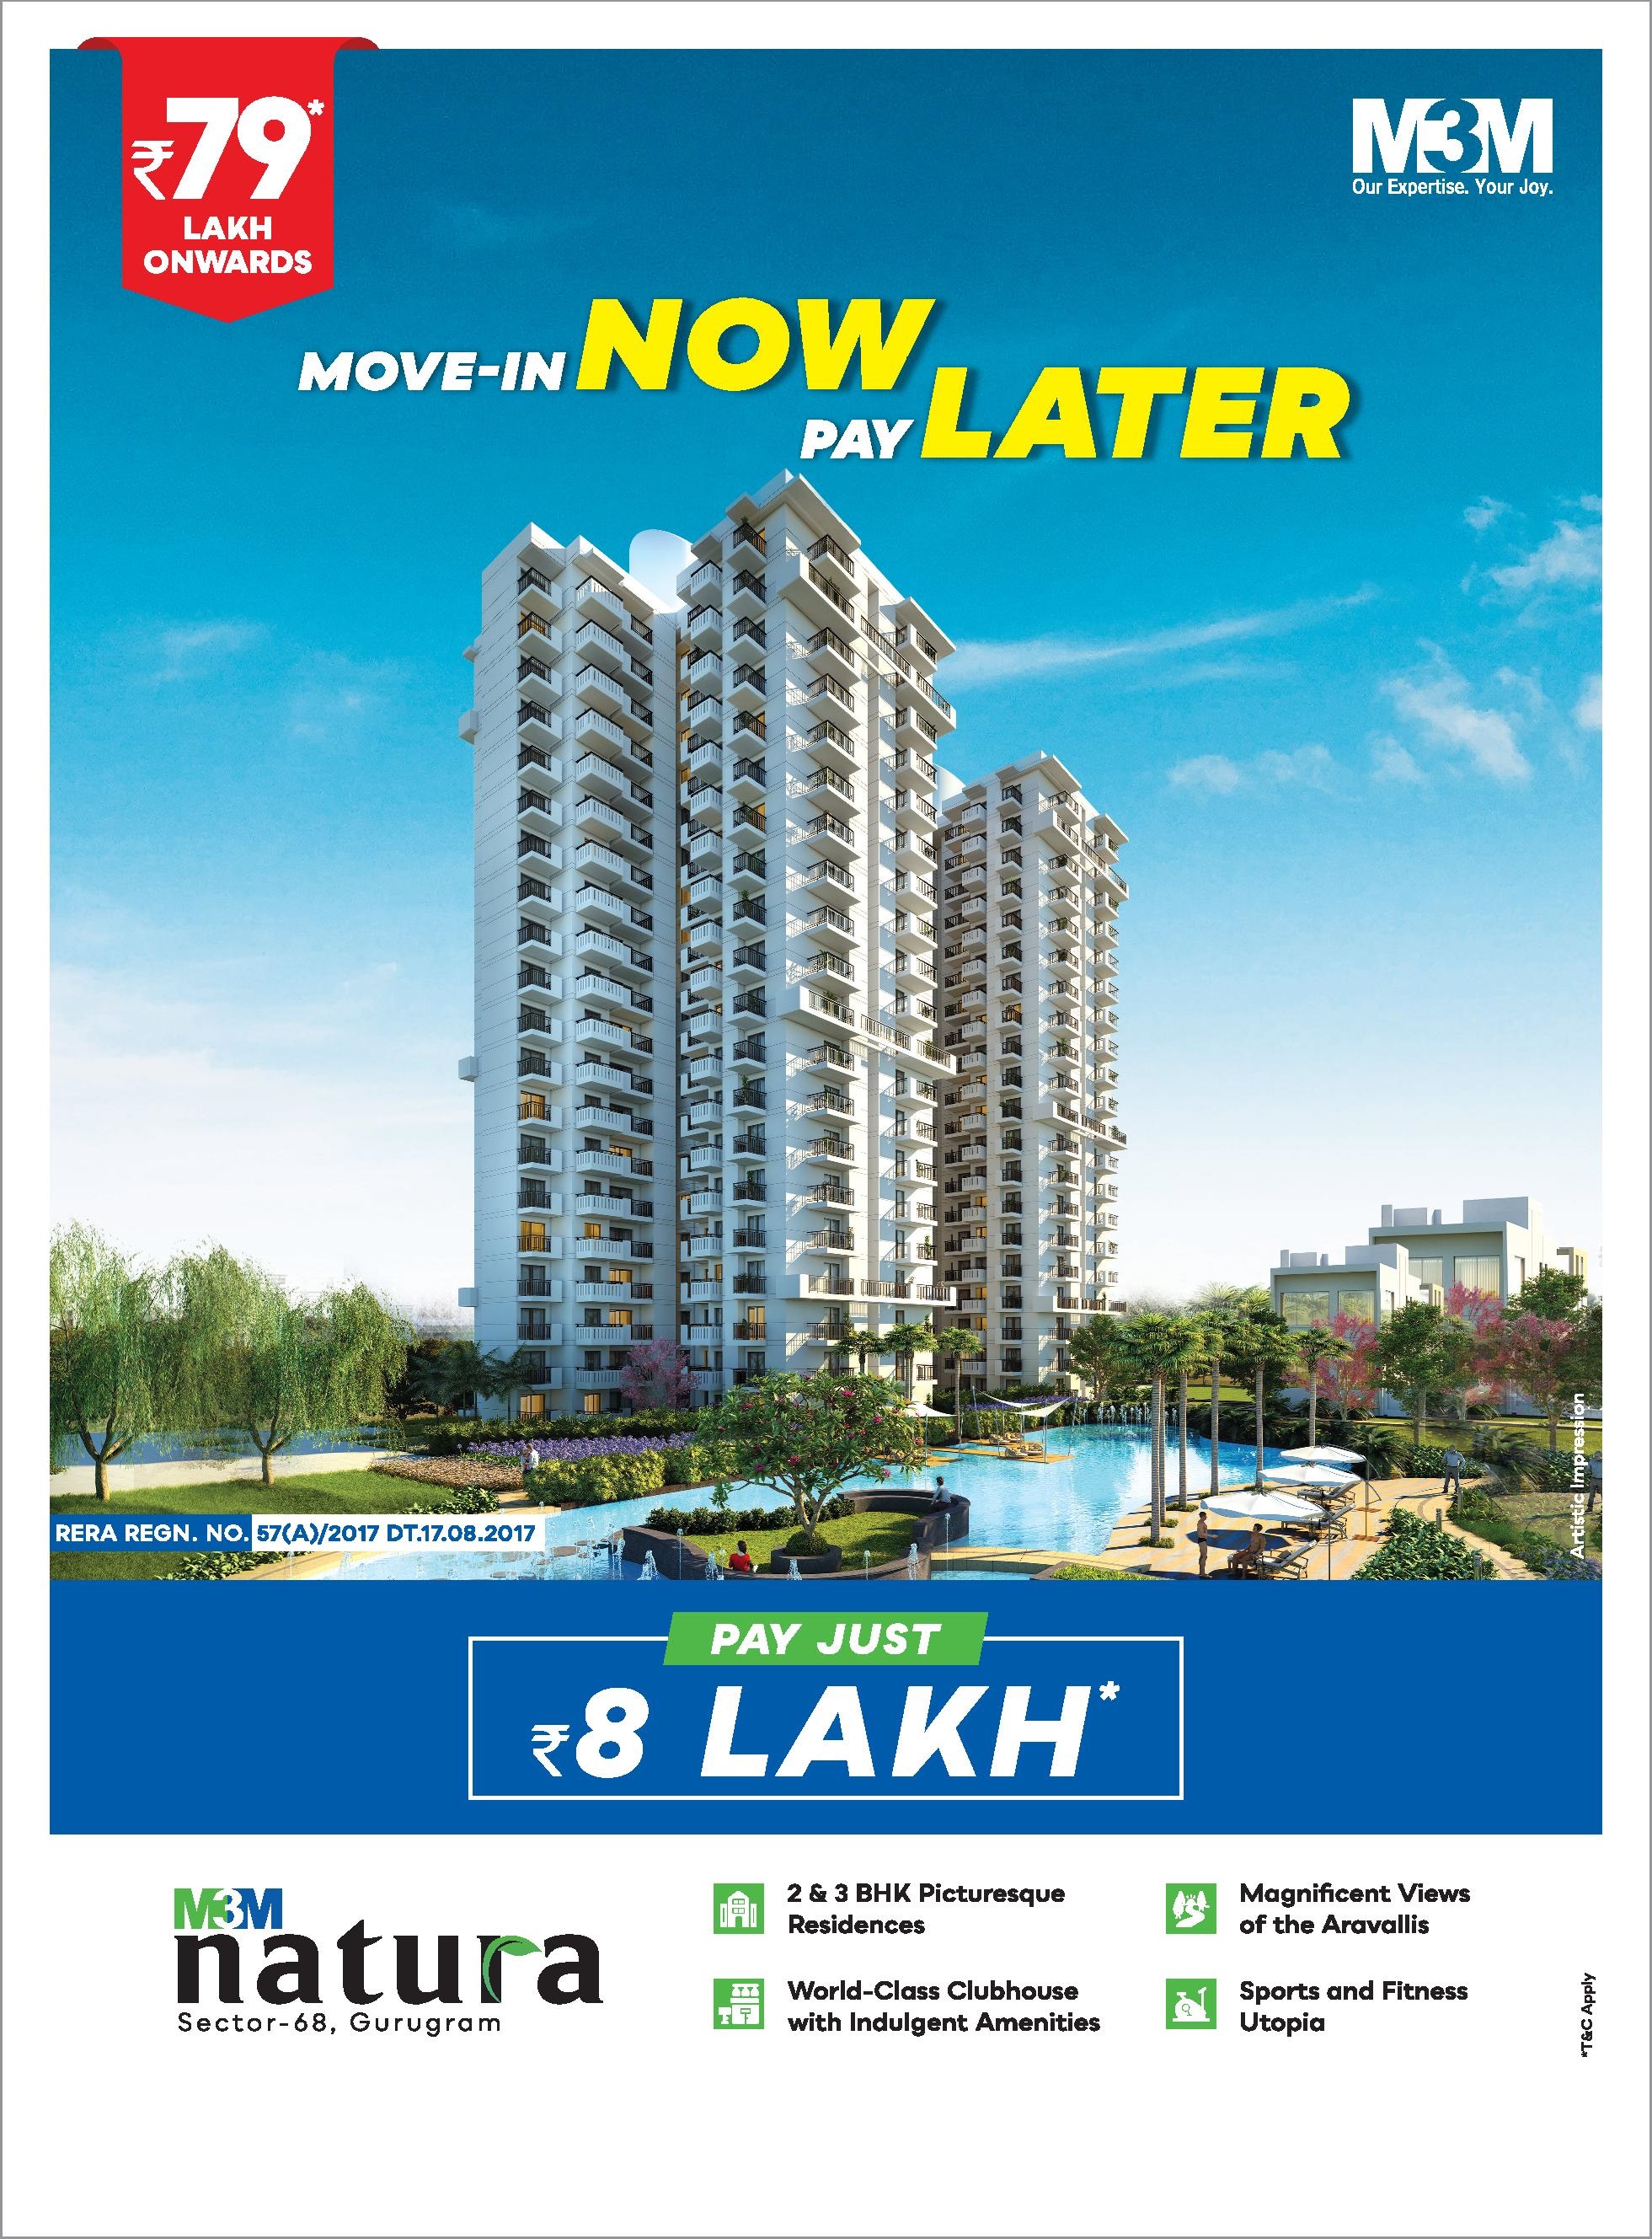 Move in now and pay later at M3M Natura in Gurgaon Update